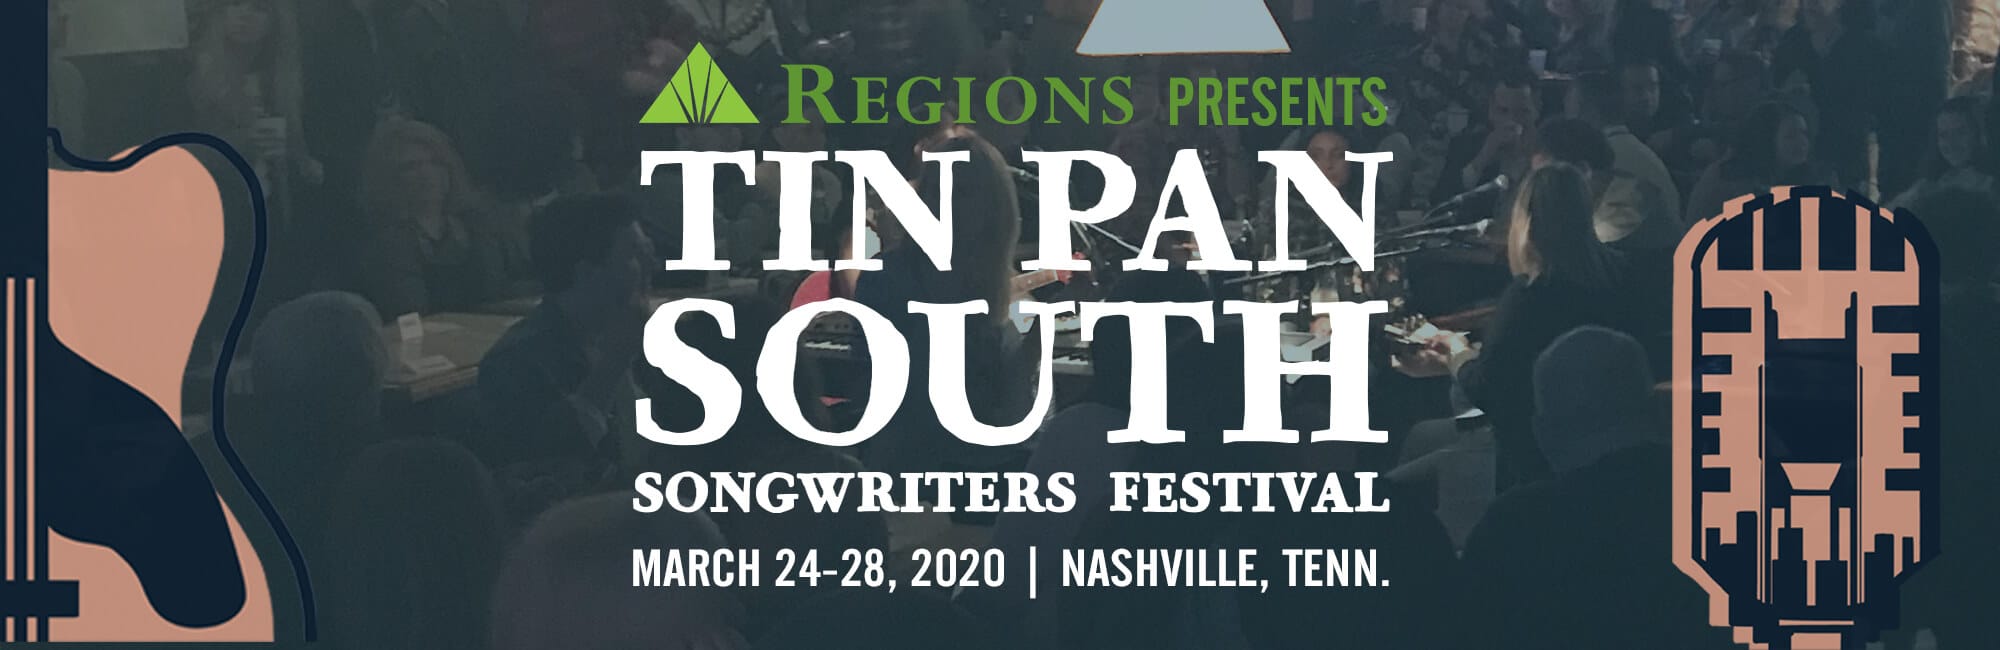 Tin Pan South Songwriters Festival To Be Rescheduled